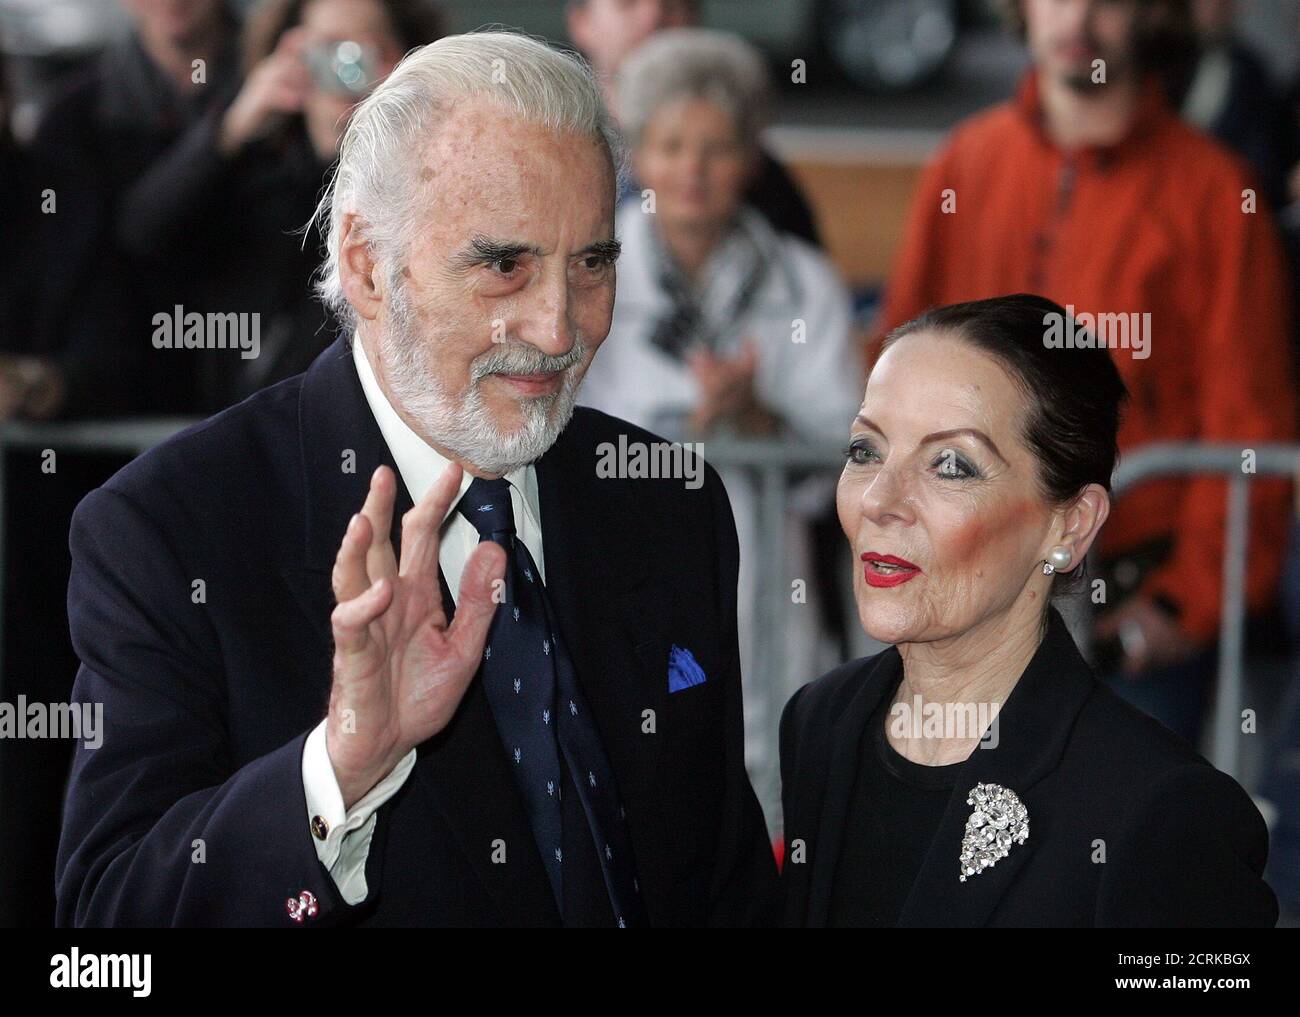 U.S. actor Christopher Lee (L) and his wife Birgit arrive at the 45th Annual Rose d'Or Festival in Lucerne, Switzerland, May 7, 2005. The Festival Rose d'Or hosts the most prestigious international awards for entertainment television programmes. REUTERS/Pascal Lauener  PLA/AEM/YH Stock Photo